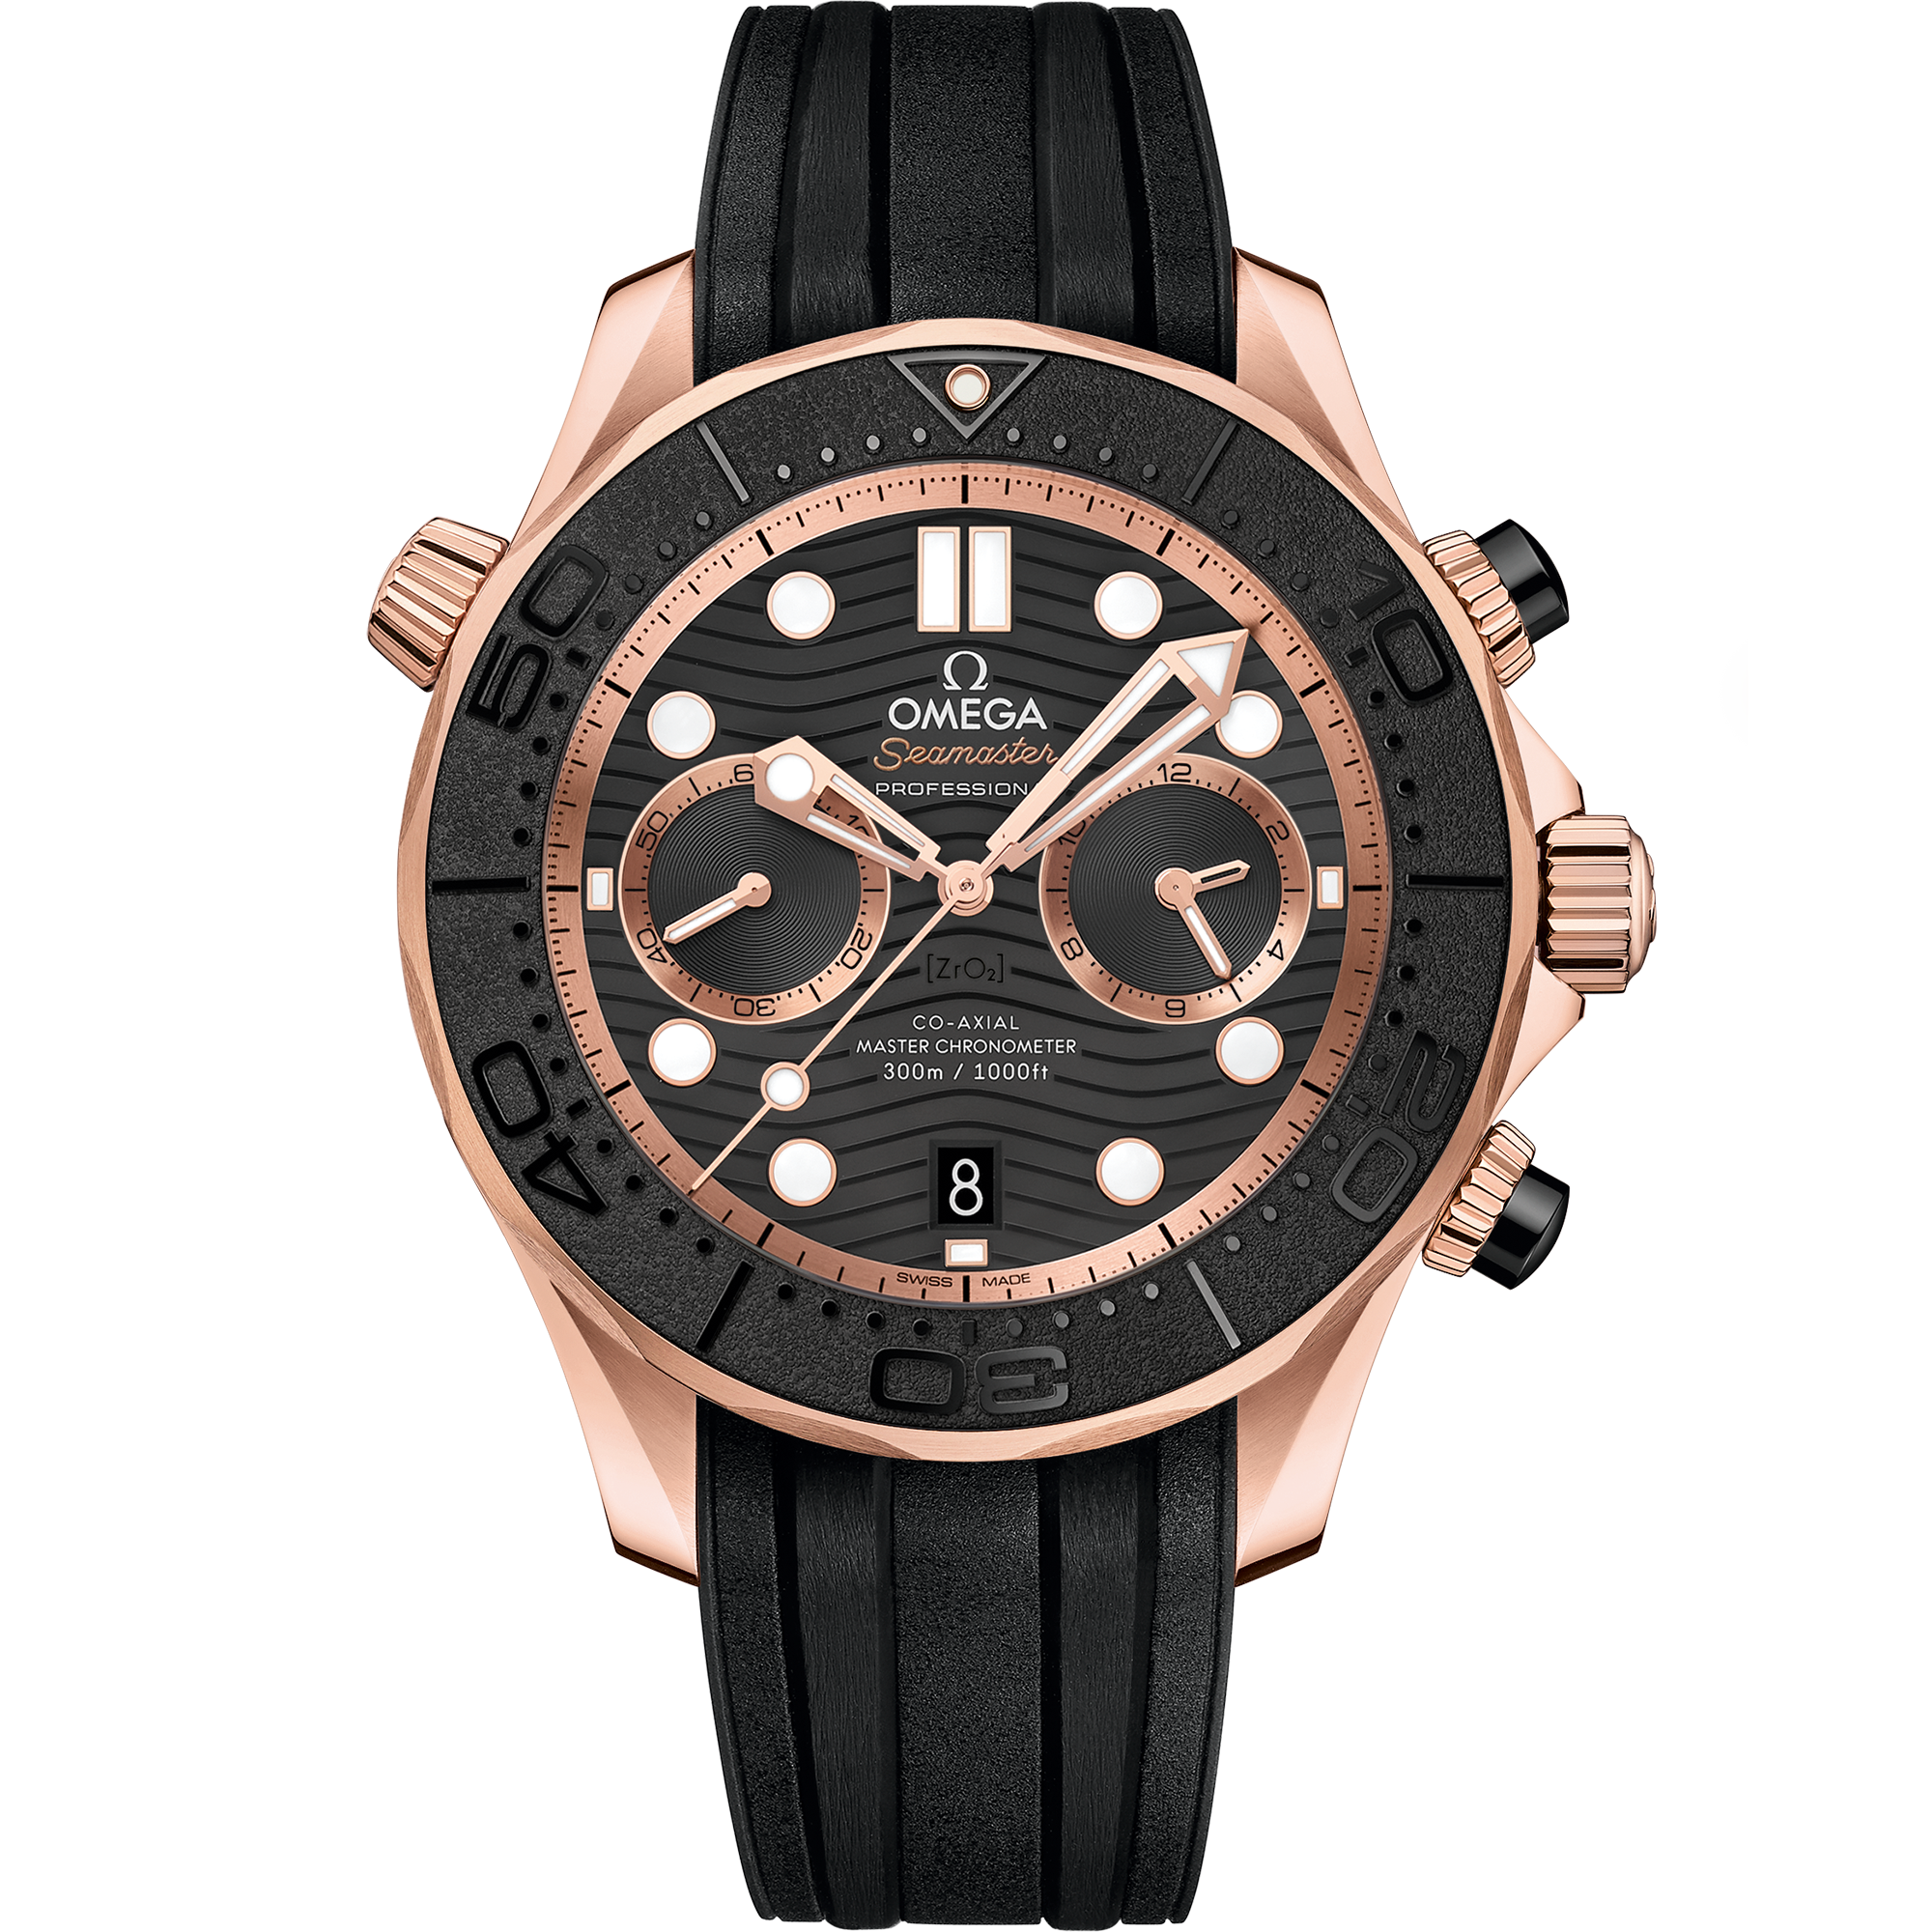 Diver 300M Seamaster Sedna™ gold Chronograph Watch 210.62.44.51.01.001 |  OMEGA US®